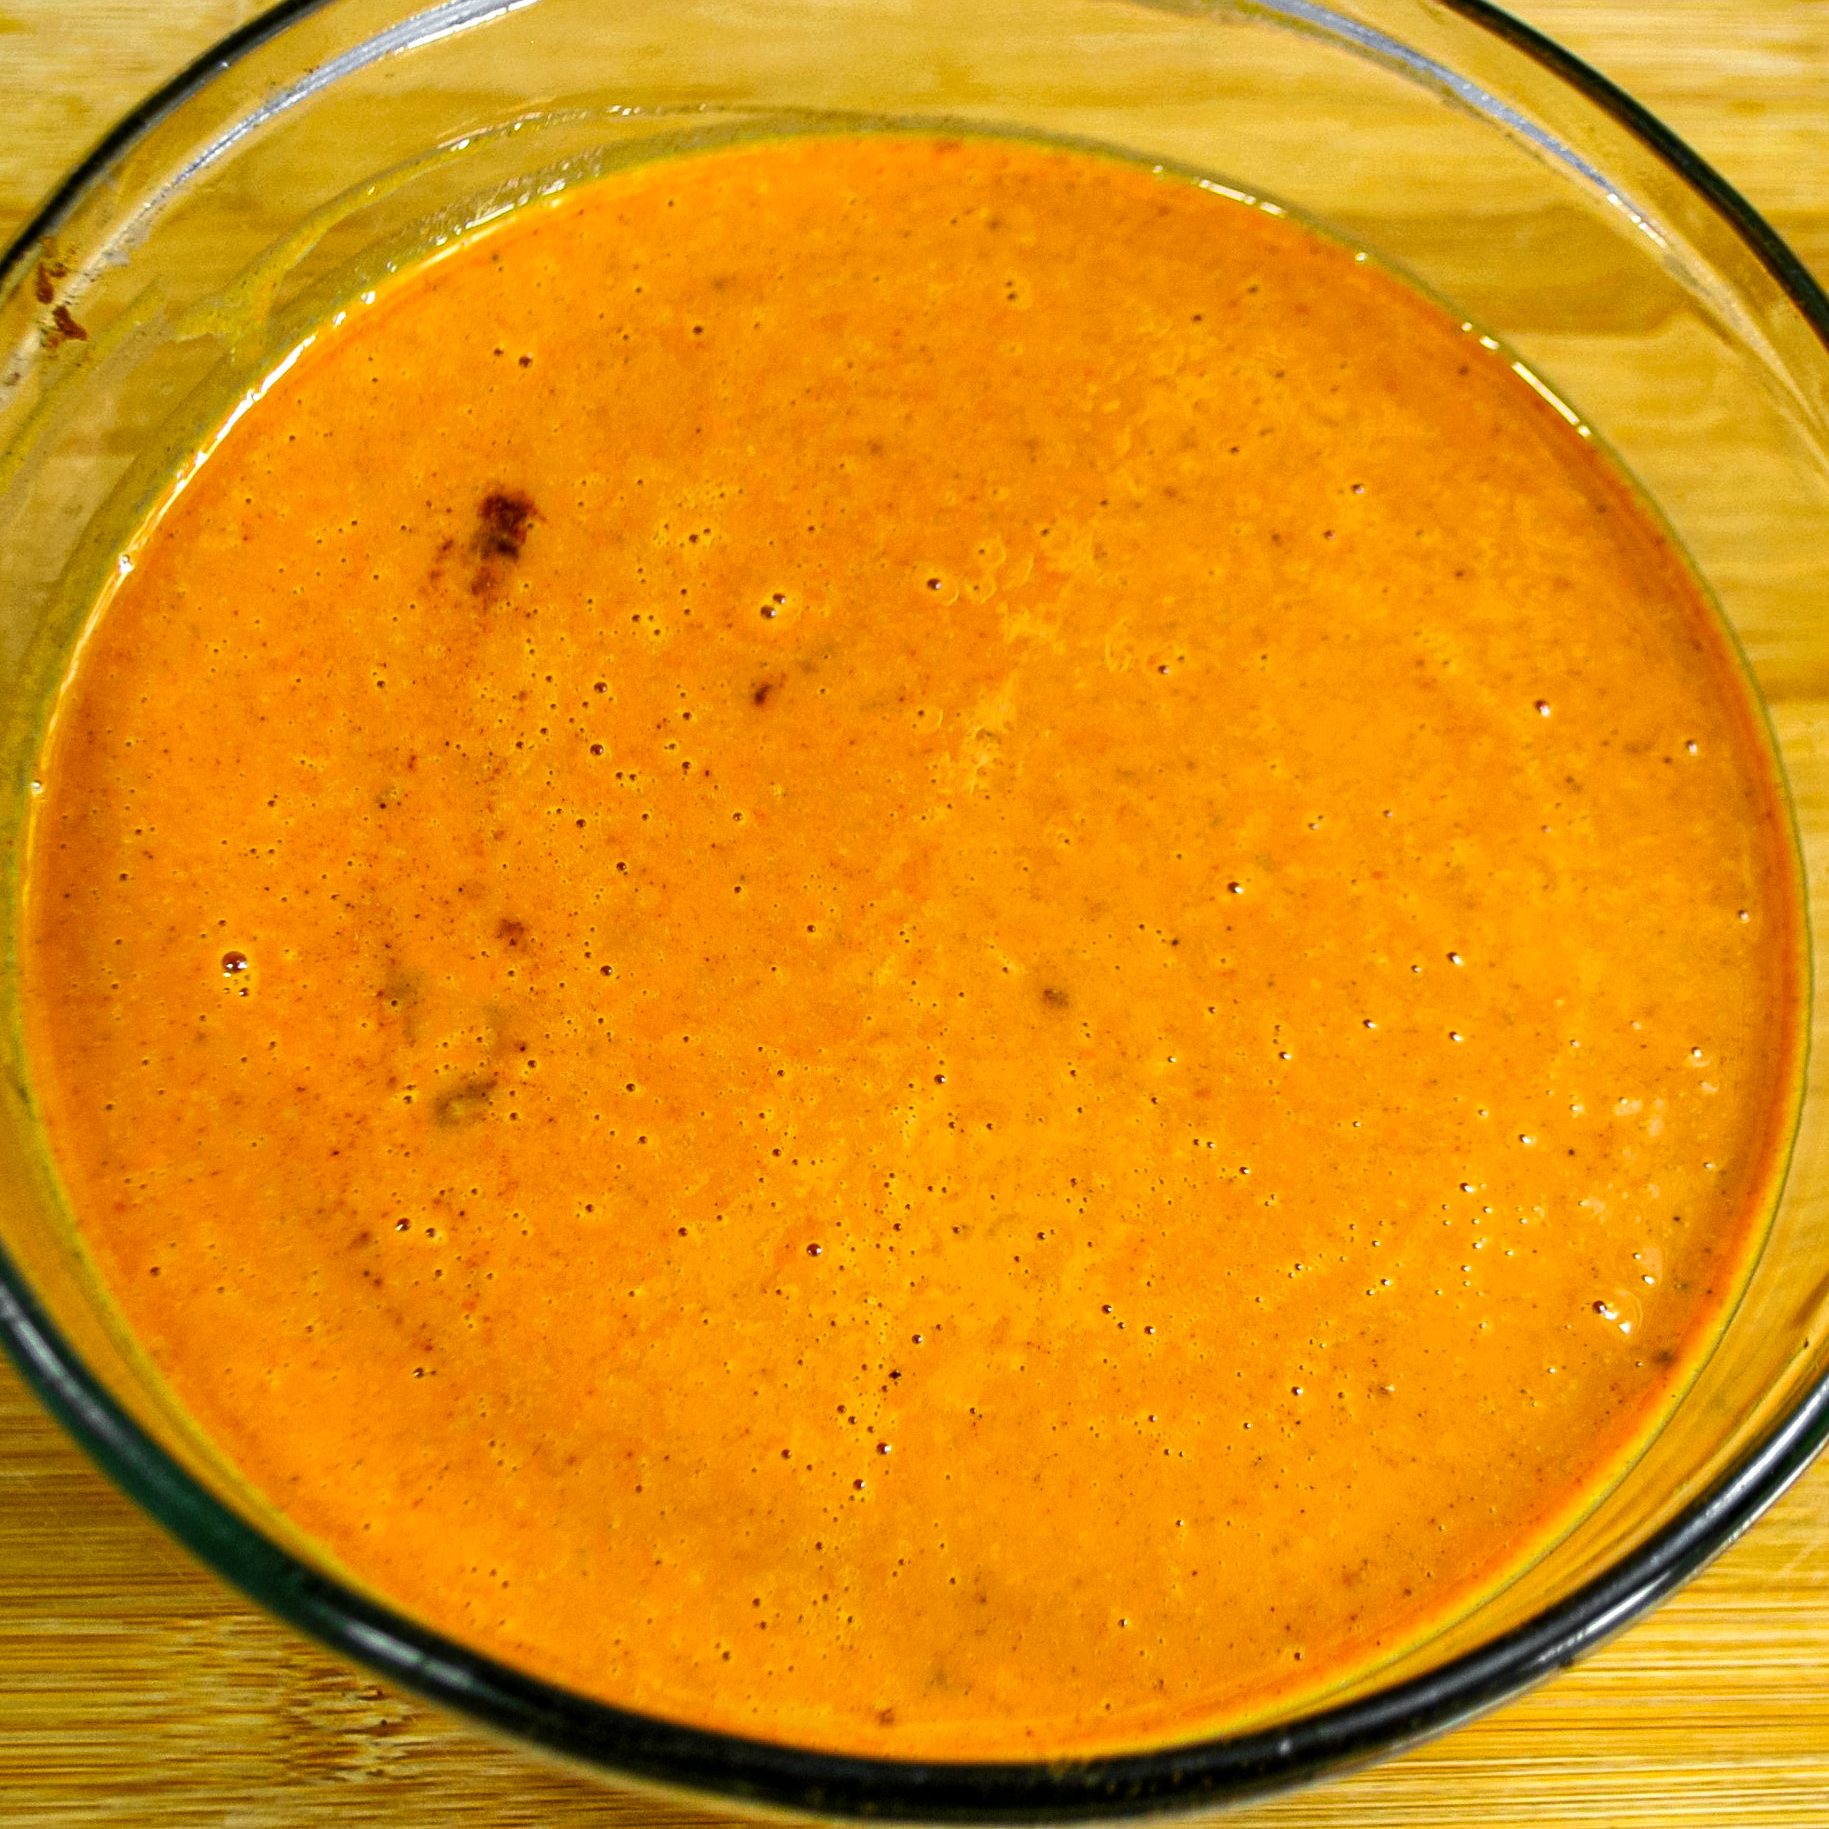 In a large mixing bowl, whisk together the pumpkin puree, evaporated milk, eggs, brown sugar, sugar, vanilla and pumpkin pie spice until smooth and combined